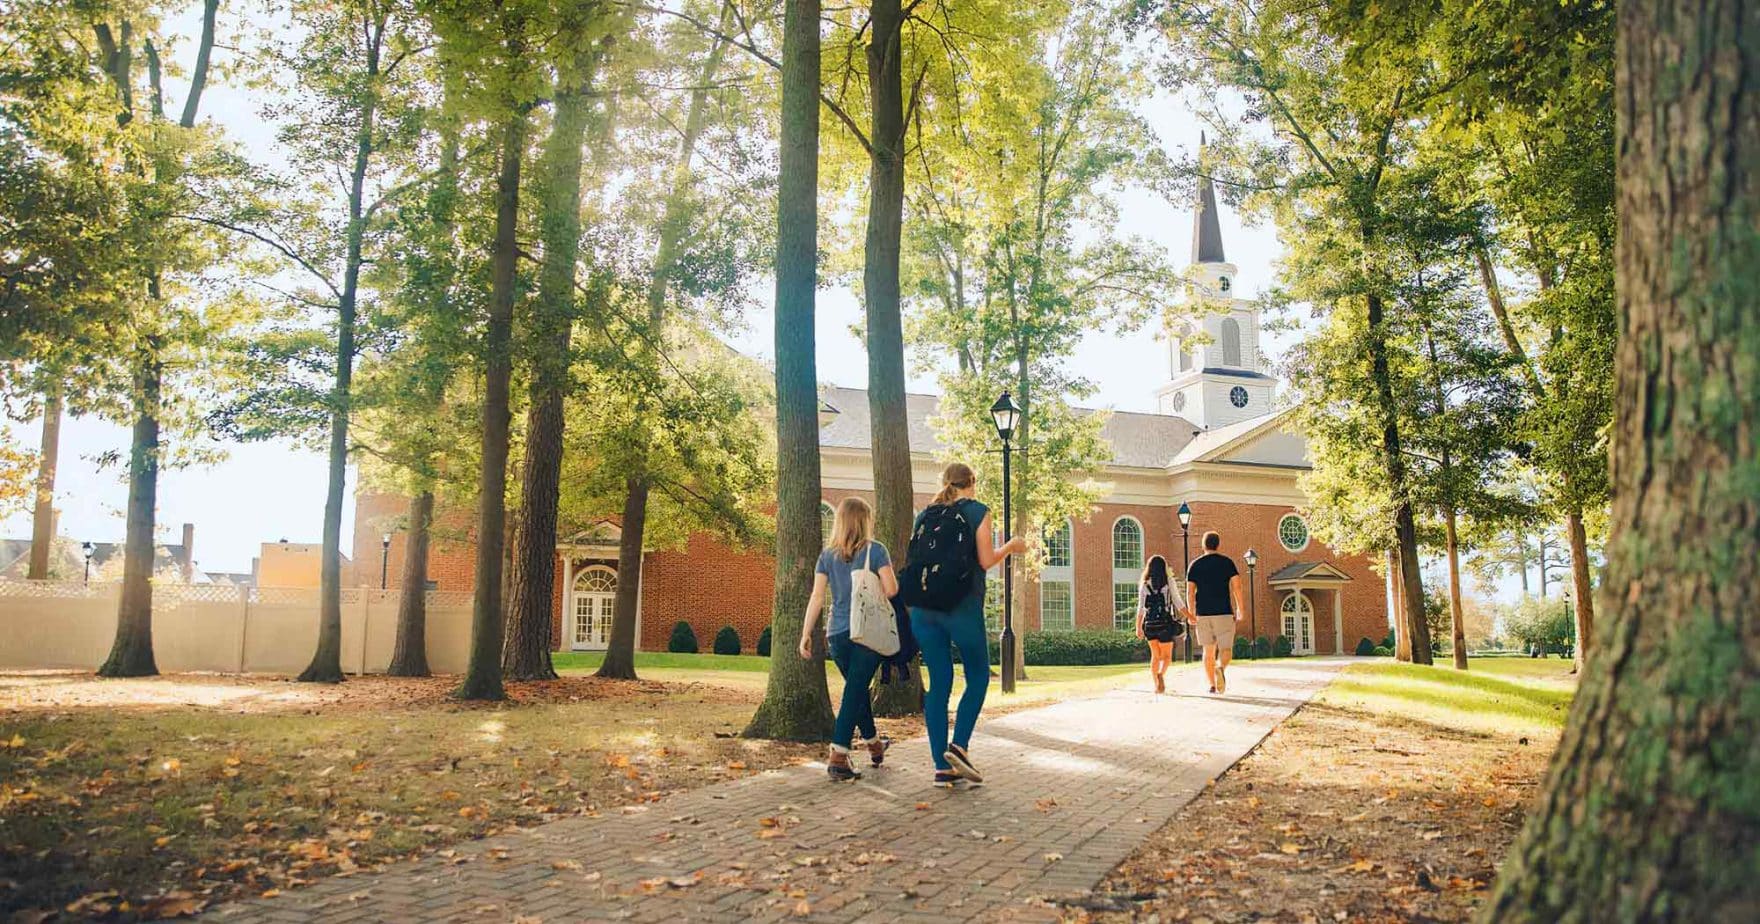 Students at Regent, a university that was named the Best Online Christian College in America for the second year in a row.